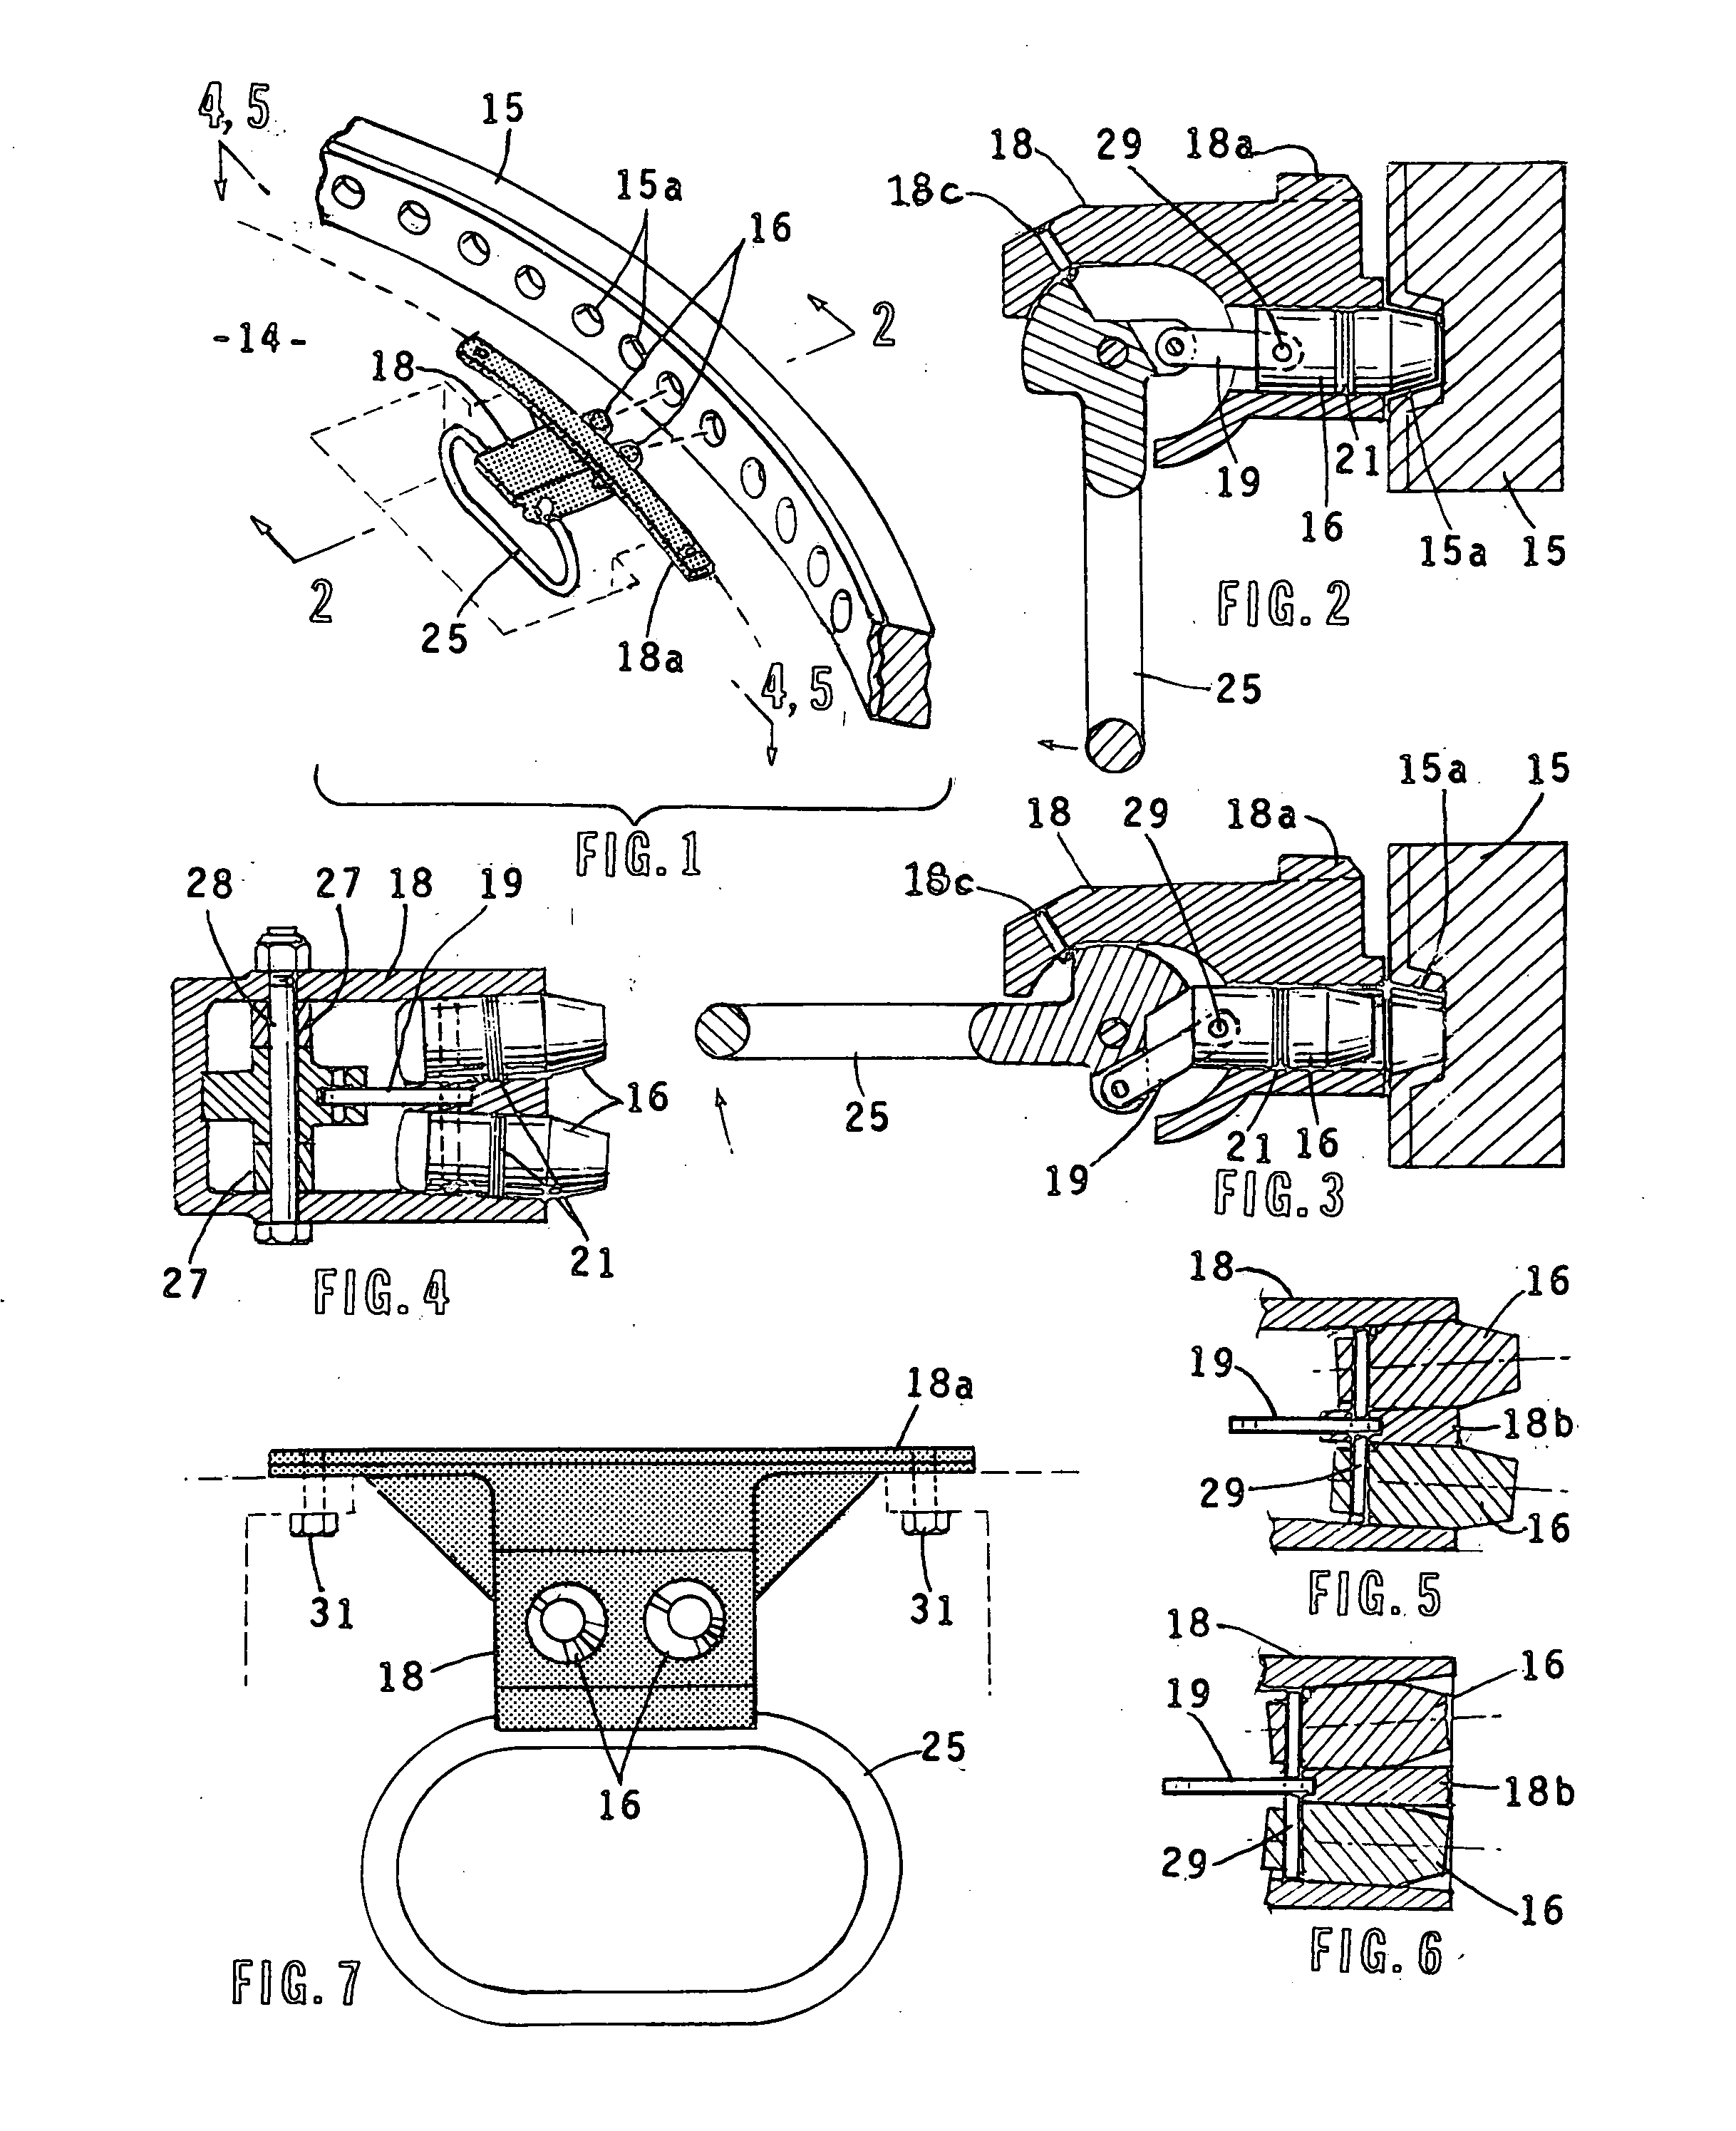 Dual pin turret lock for military vehicle